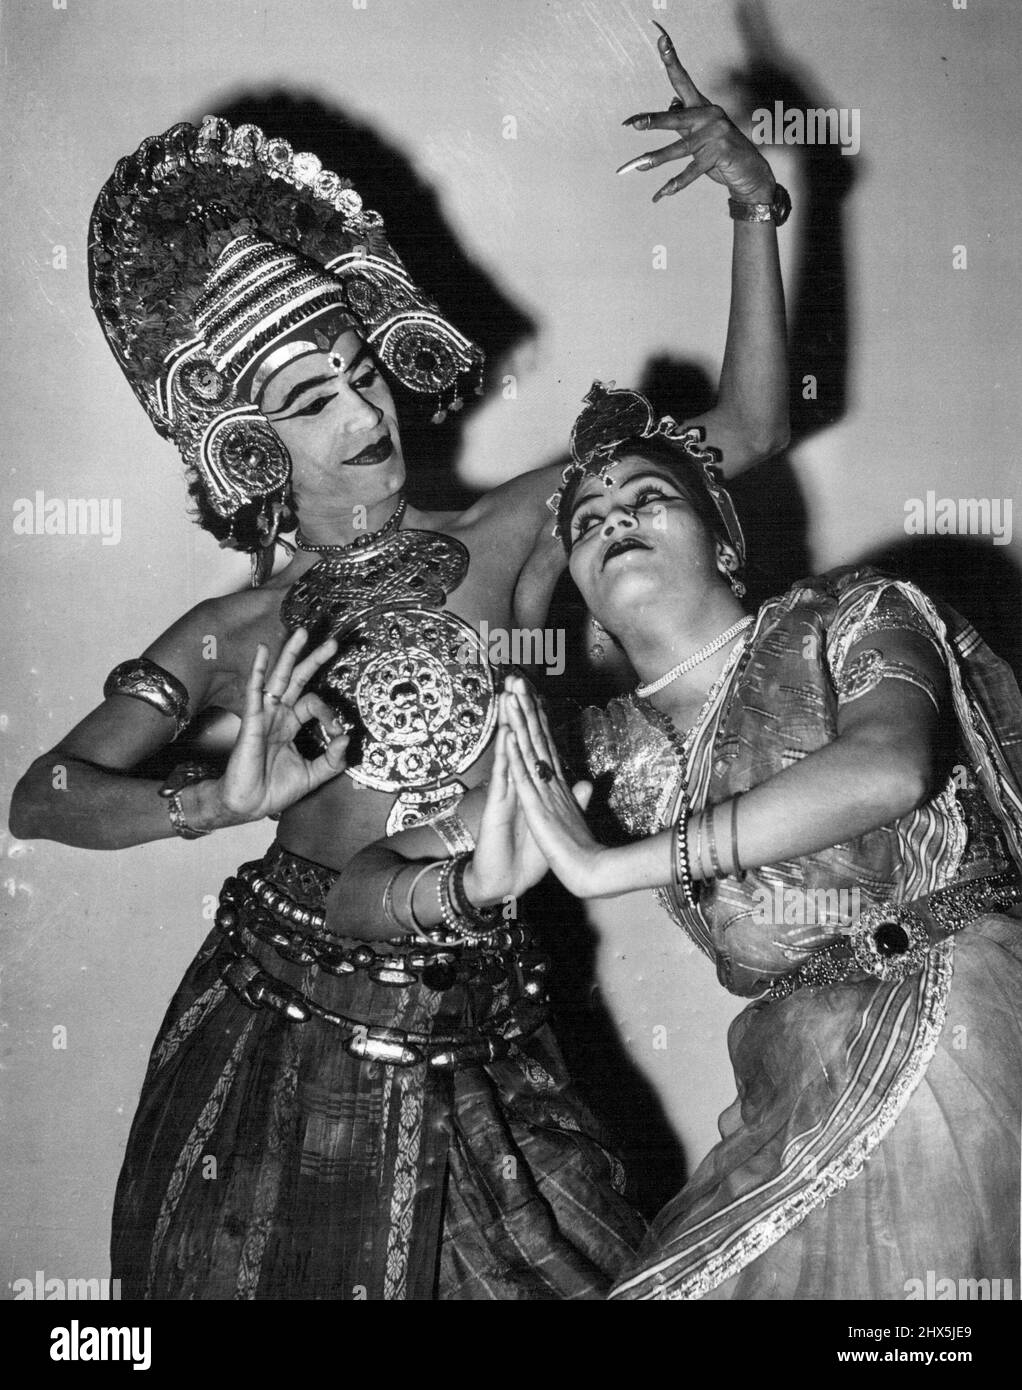 Indian dancer Shivaram (left) and Janaki during one of their ceremonial dances. Currently appearing in Melbourne, they will go to Sydney in a few weeks. March 16, 1950. Stock Photo